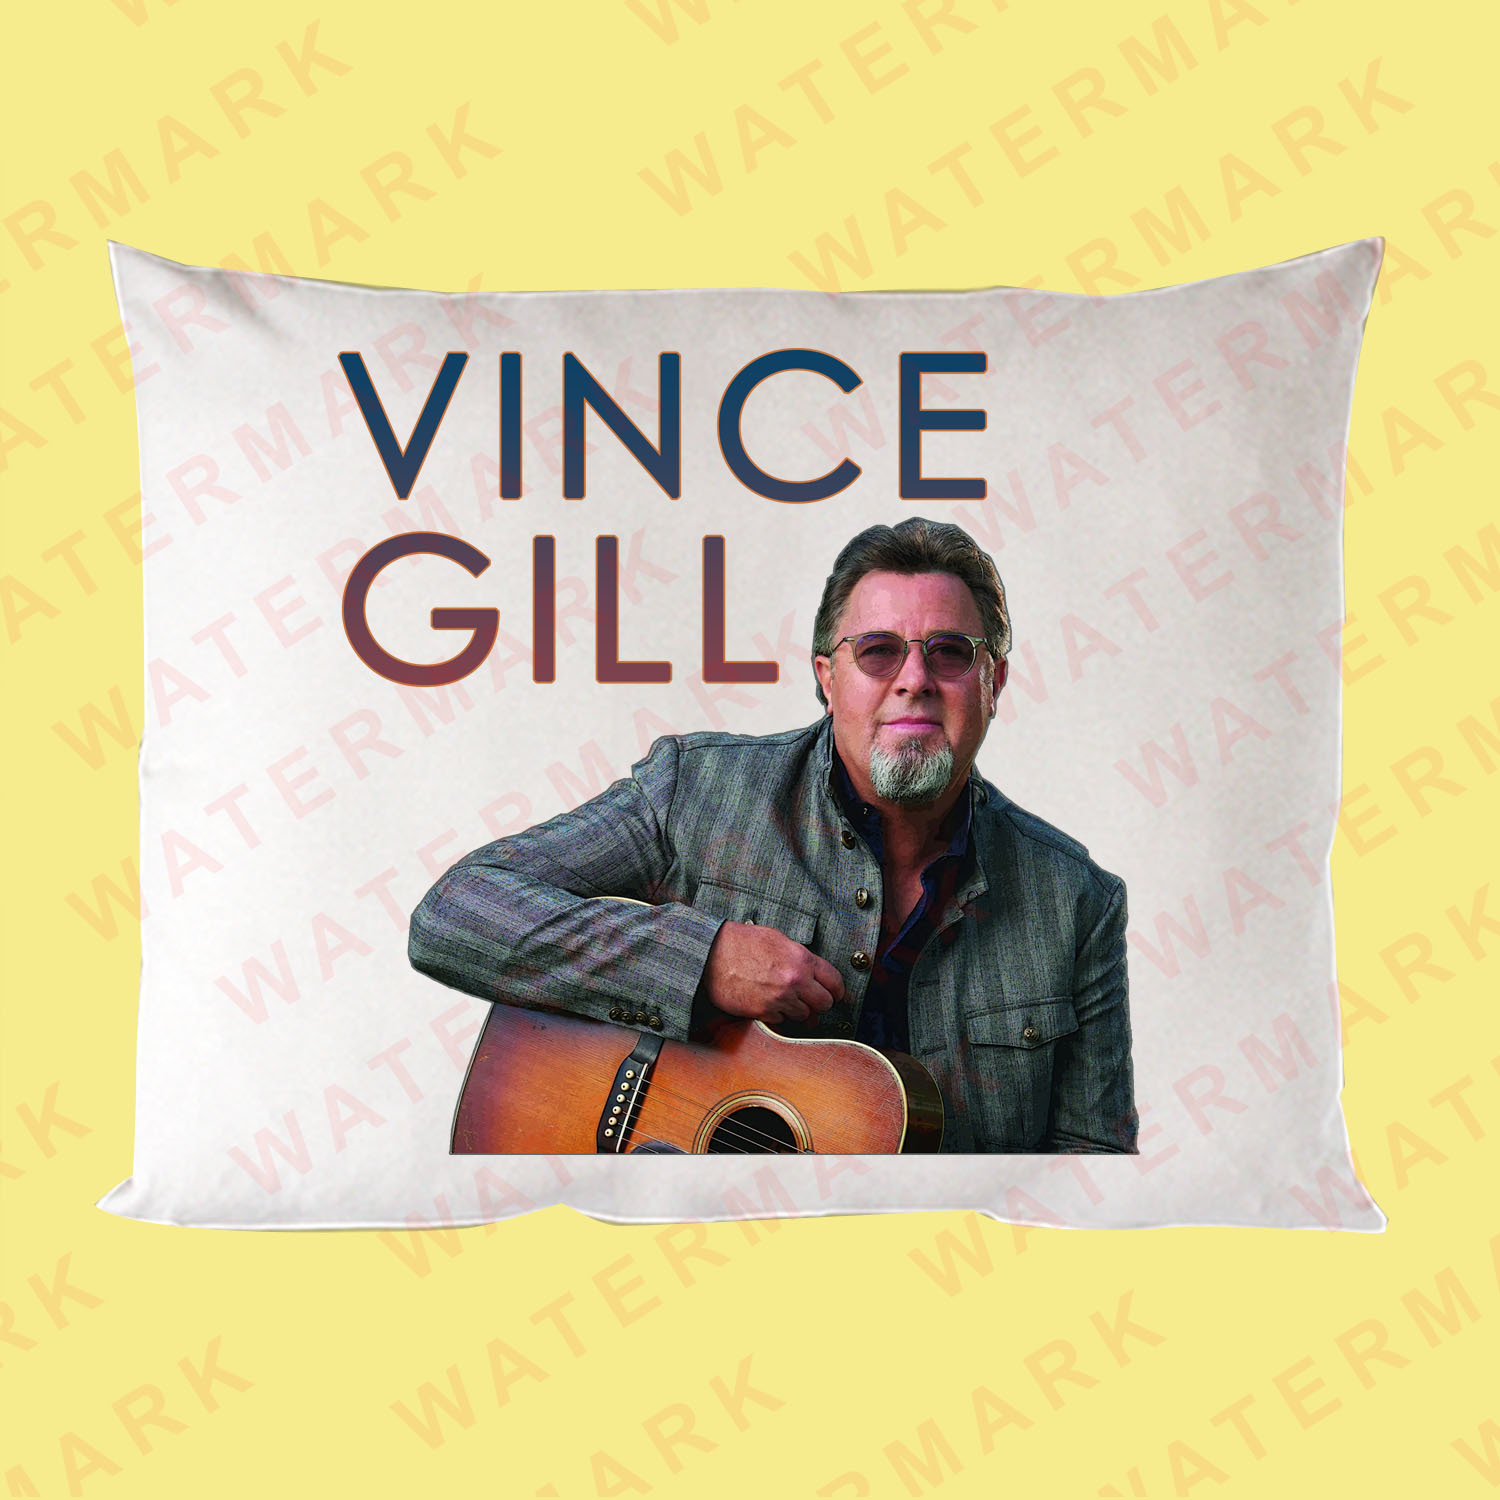 Primary image for VINCE GILL TOUR 2023 Pillow cases